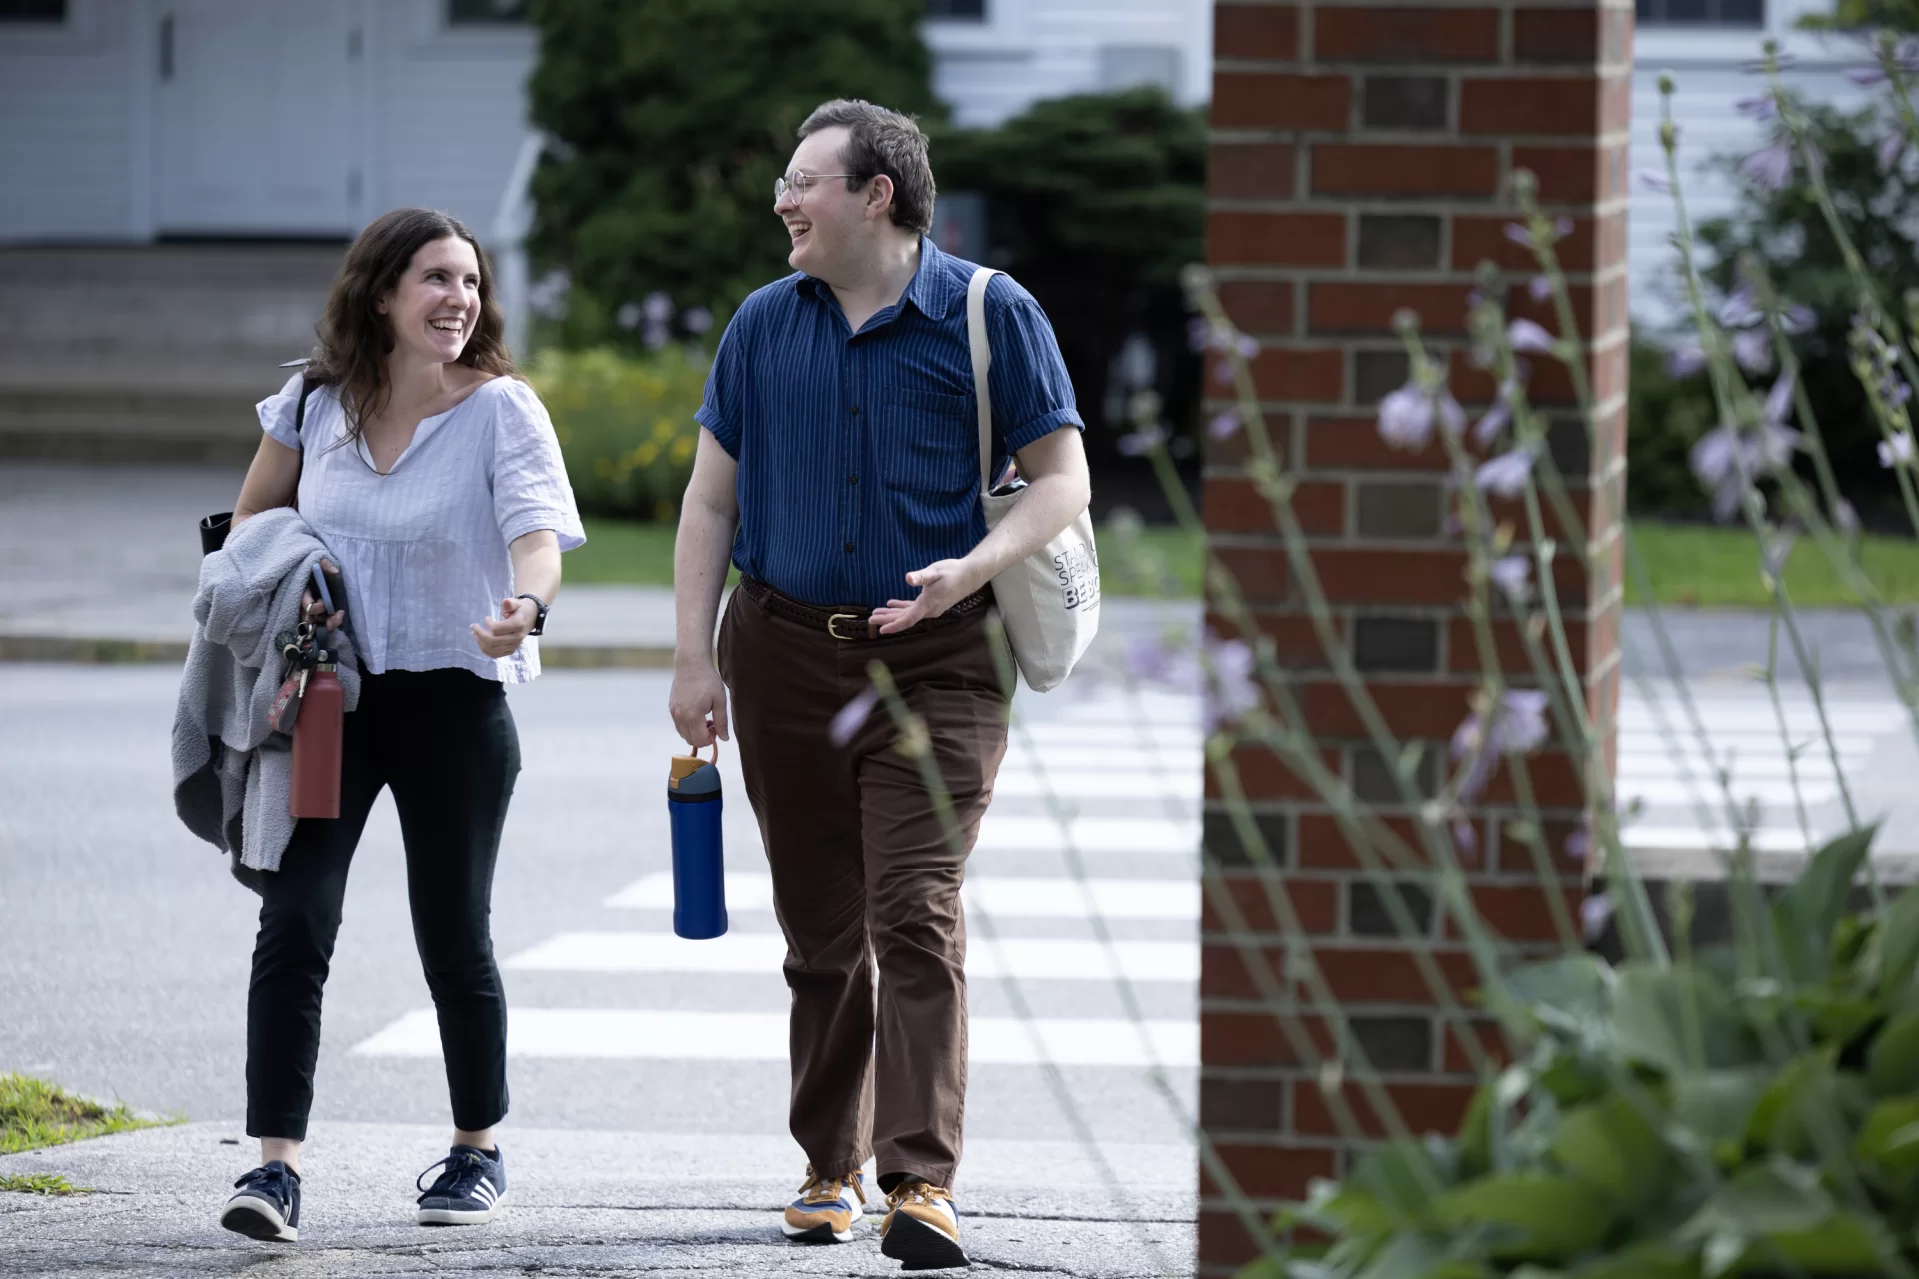 Admission Counselors Erin Lachance and Jeremy McFarland end their day with a stroll through the Class of 1906 Gate, a Campus Avenue entry to the Historic Quad.